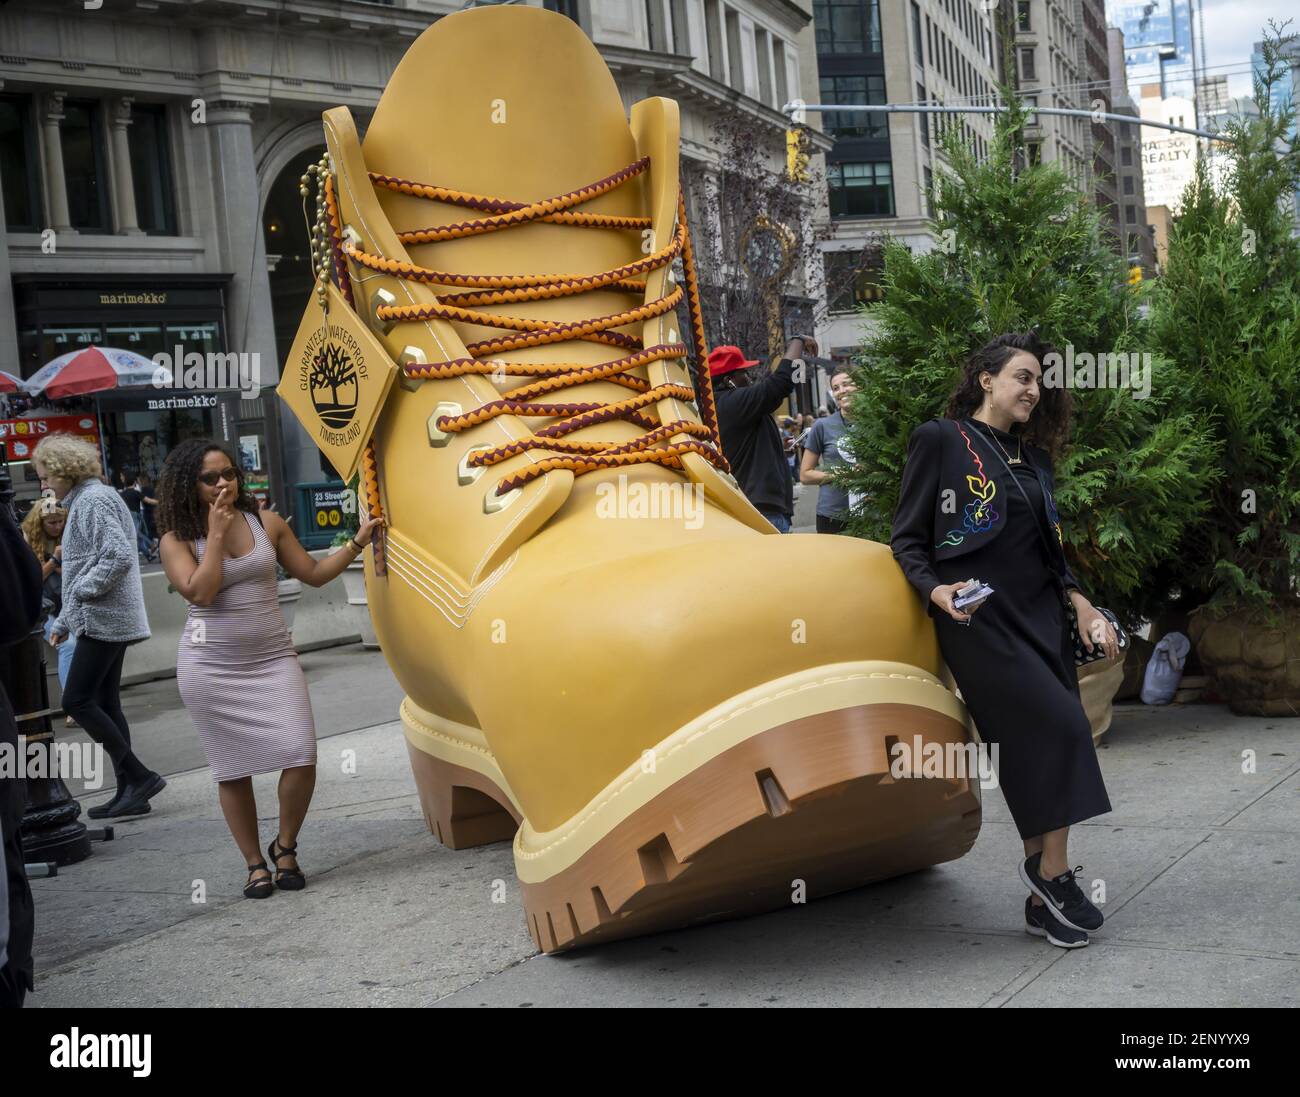 Visitors to Flatiron Plaza in New on October 2019 participate in a branding event for VF Corp.'s Timberland boots and apparel brand. taking a pledge to support the